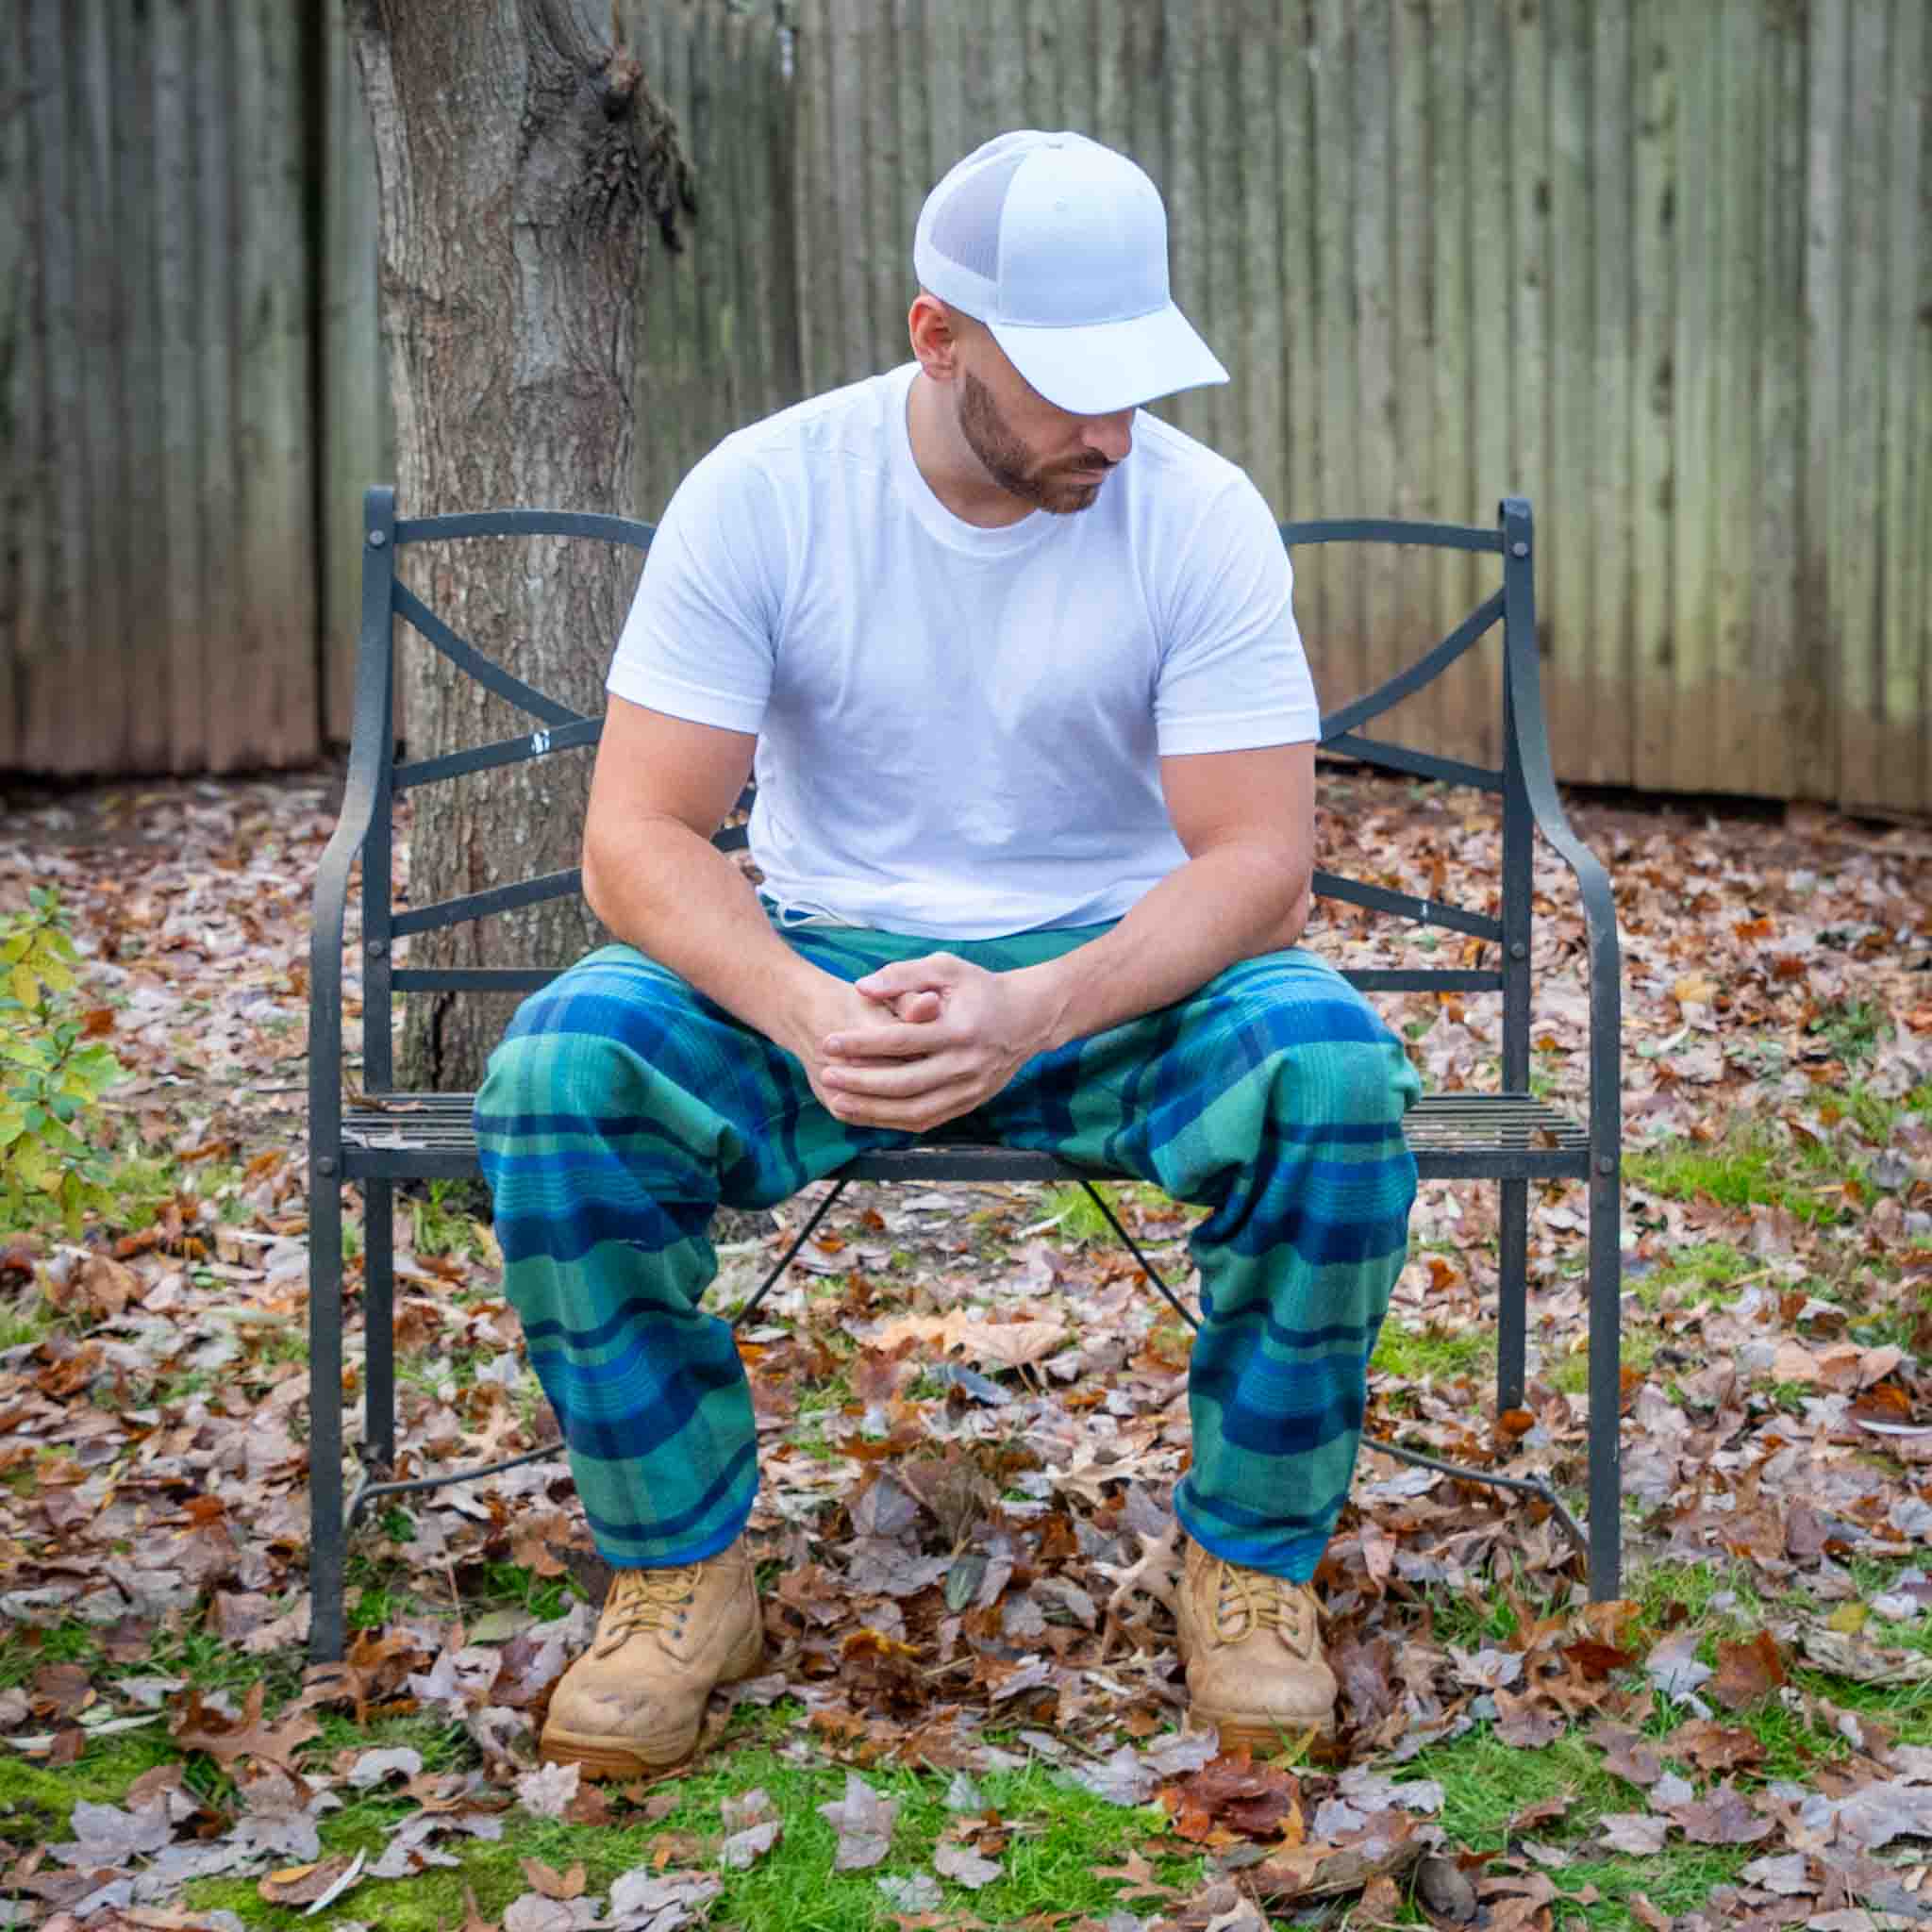 JWM Flannel Lounge Pants RoyalNavyGreen Compare at $185 ( Allow 1-2 weeks for delivery )